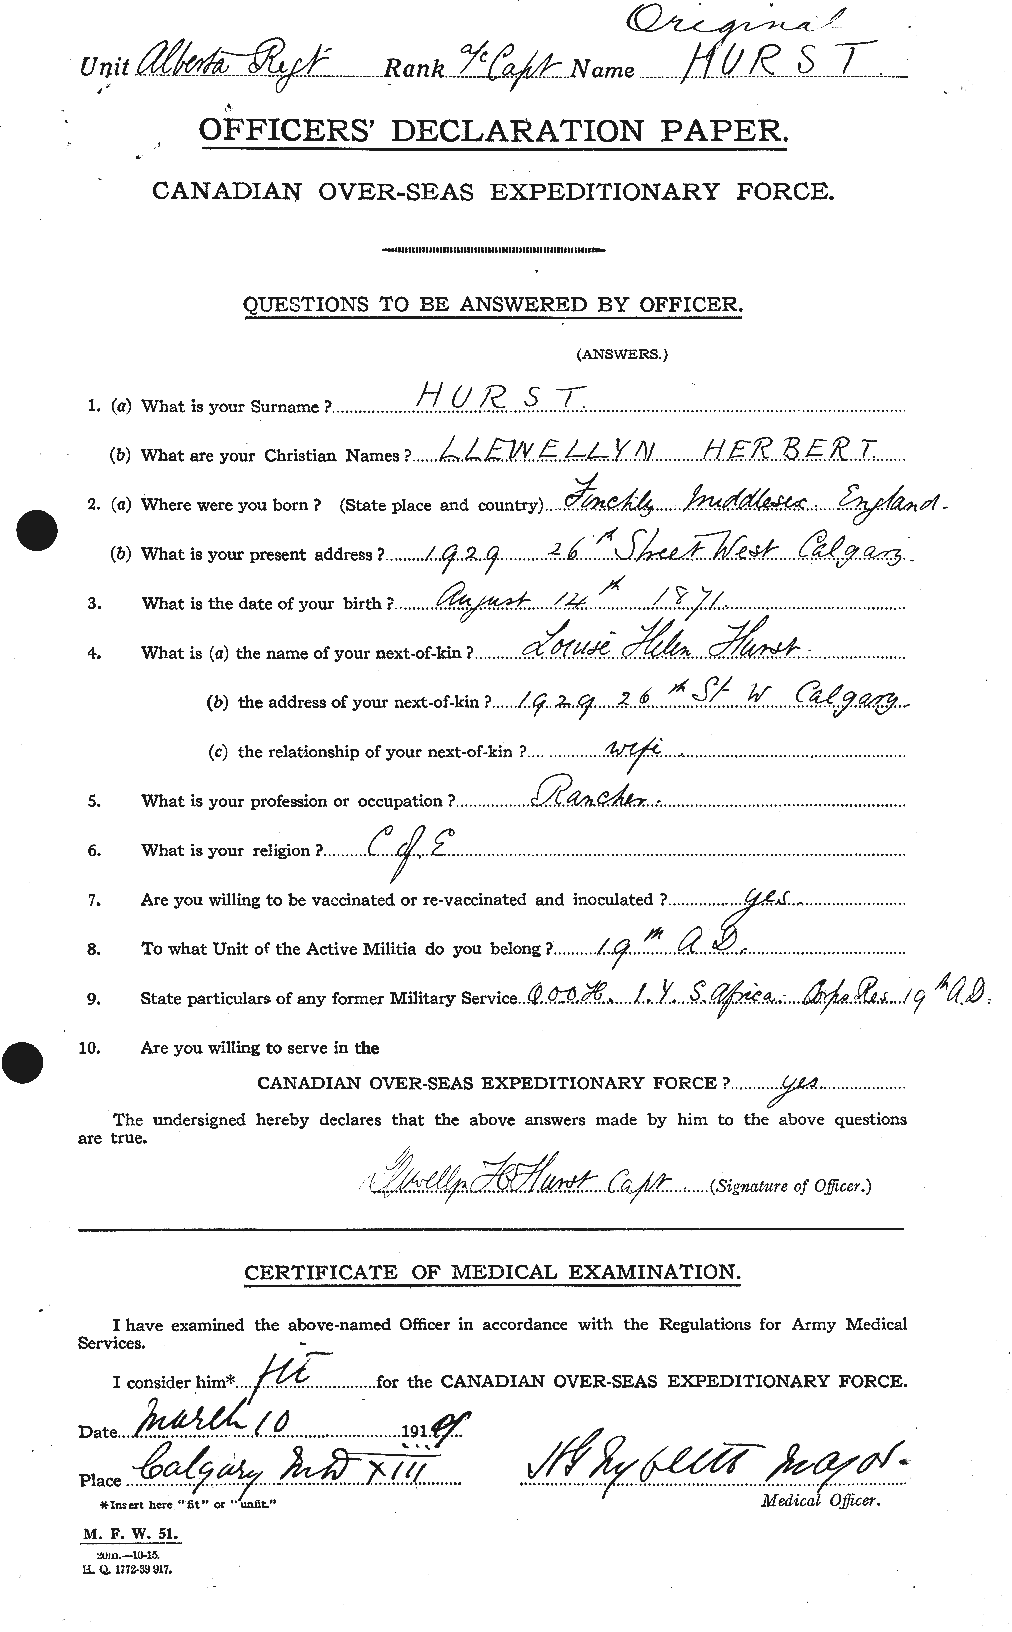 Personnel Records of the First World War - CEF 409973a